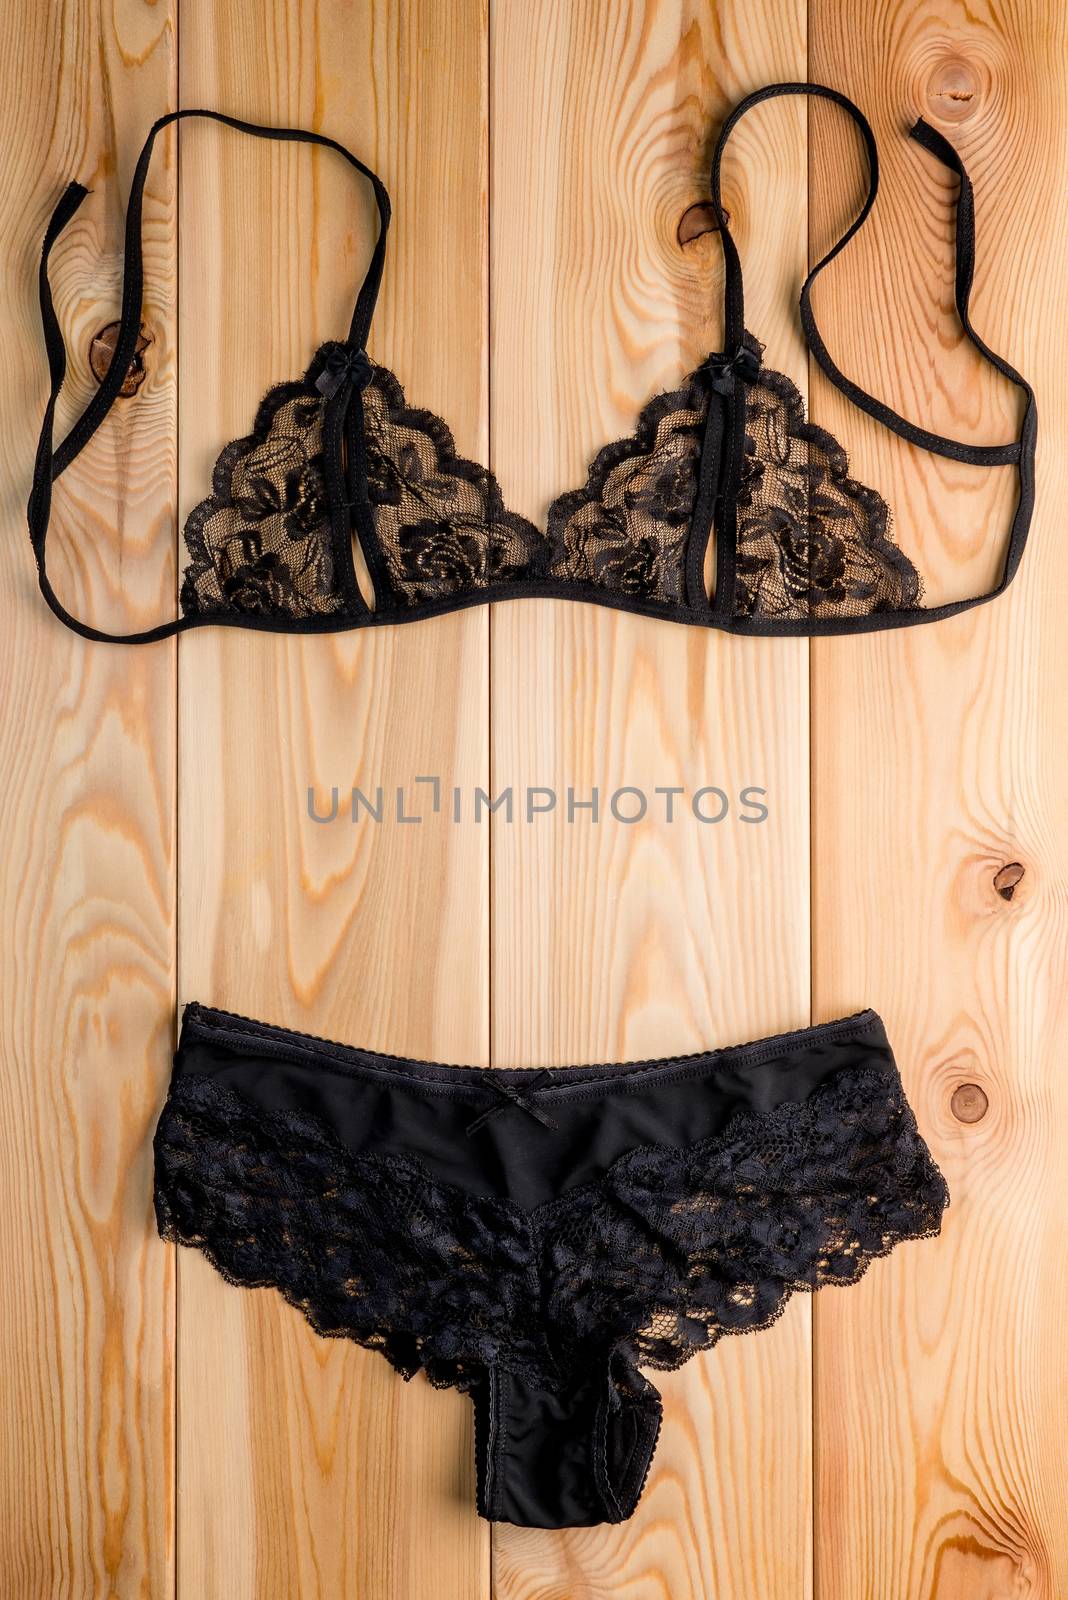 Sets of sexy lace lingerie to seduce on the wooden floor